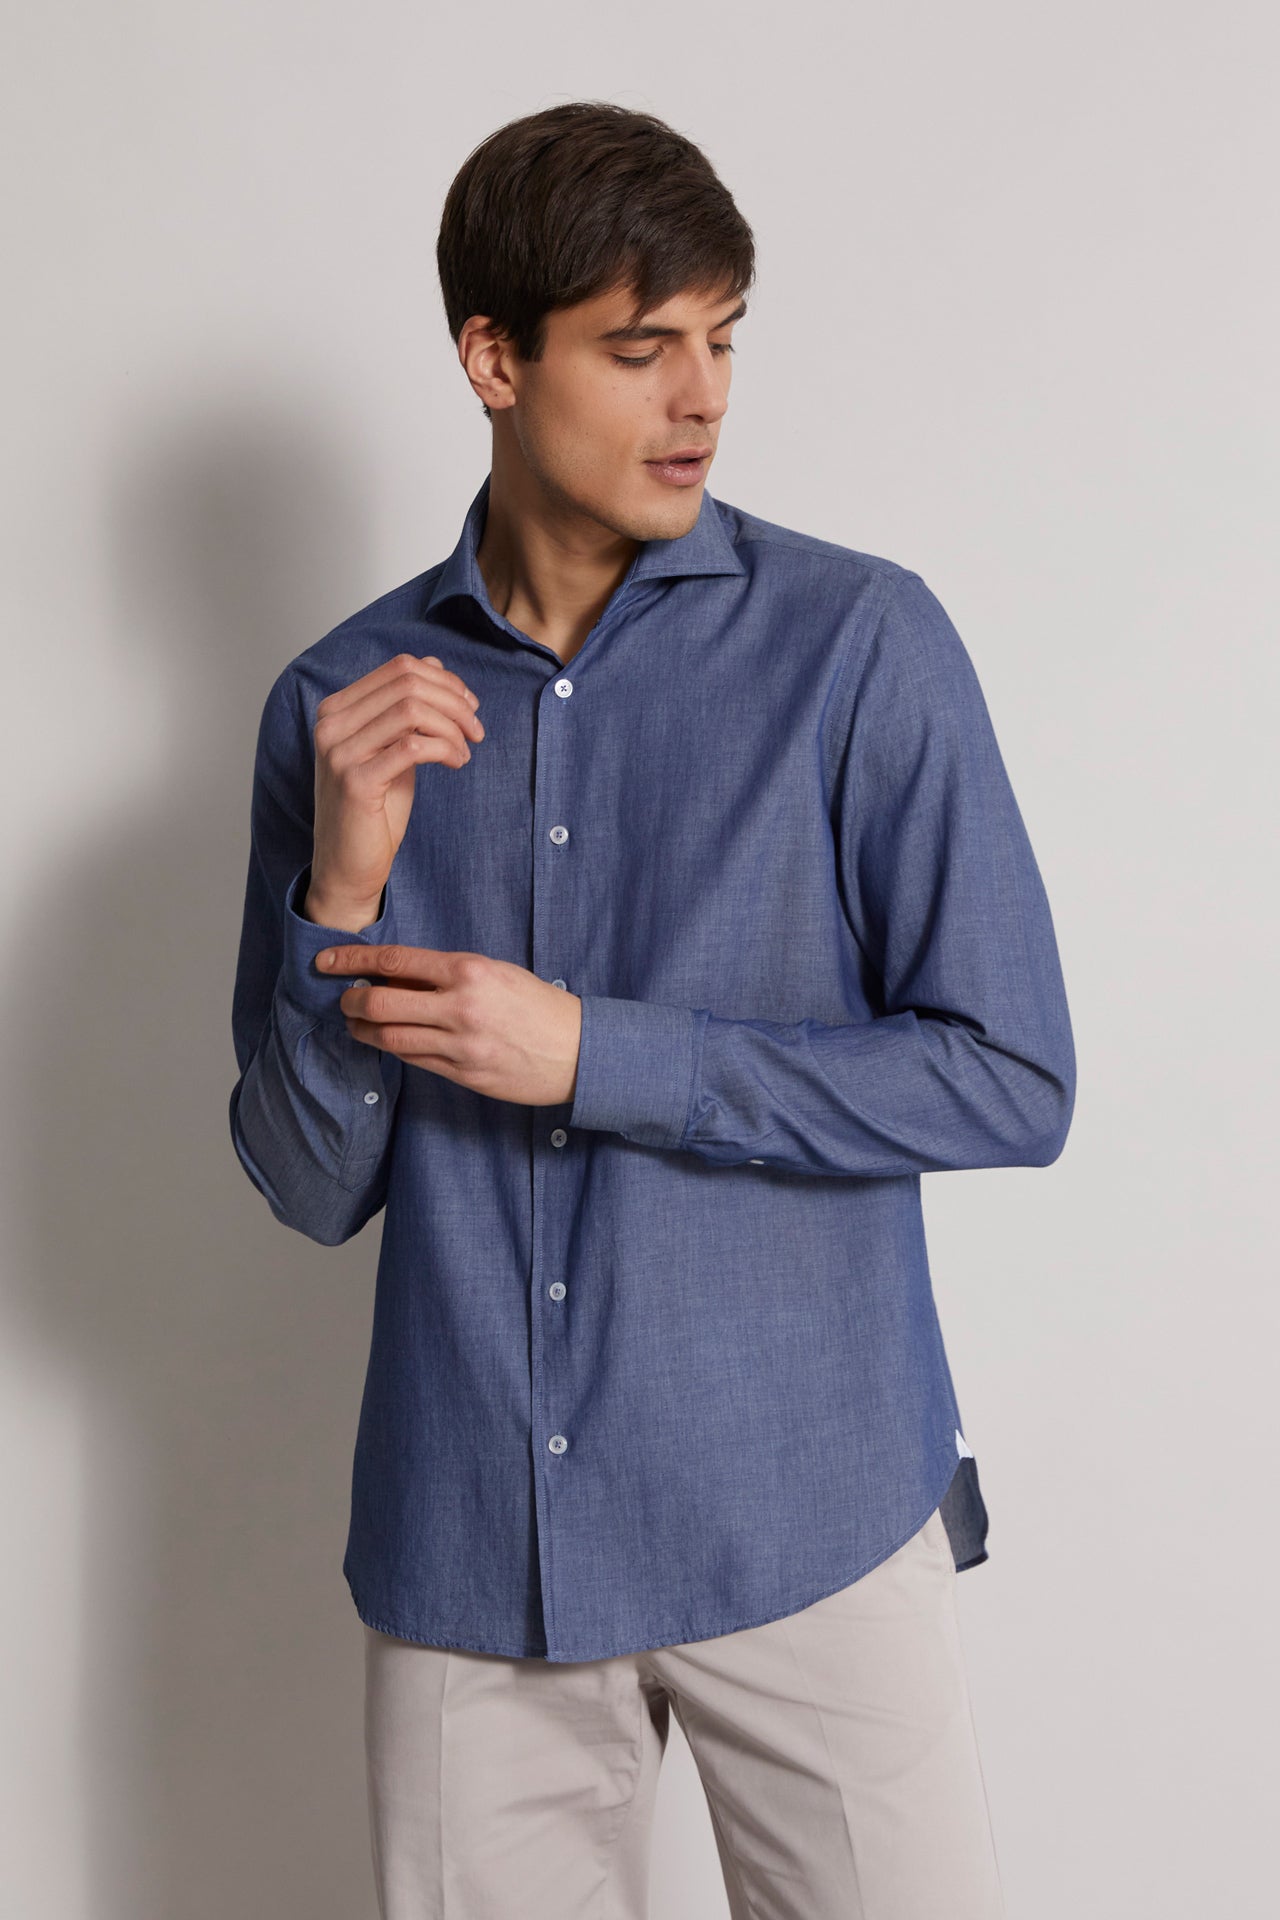 men's designer denim shirt with long sleeves in navy blue - front view